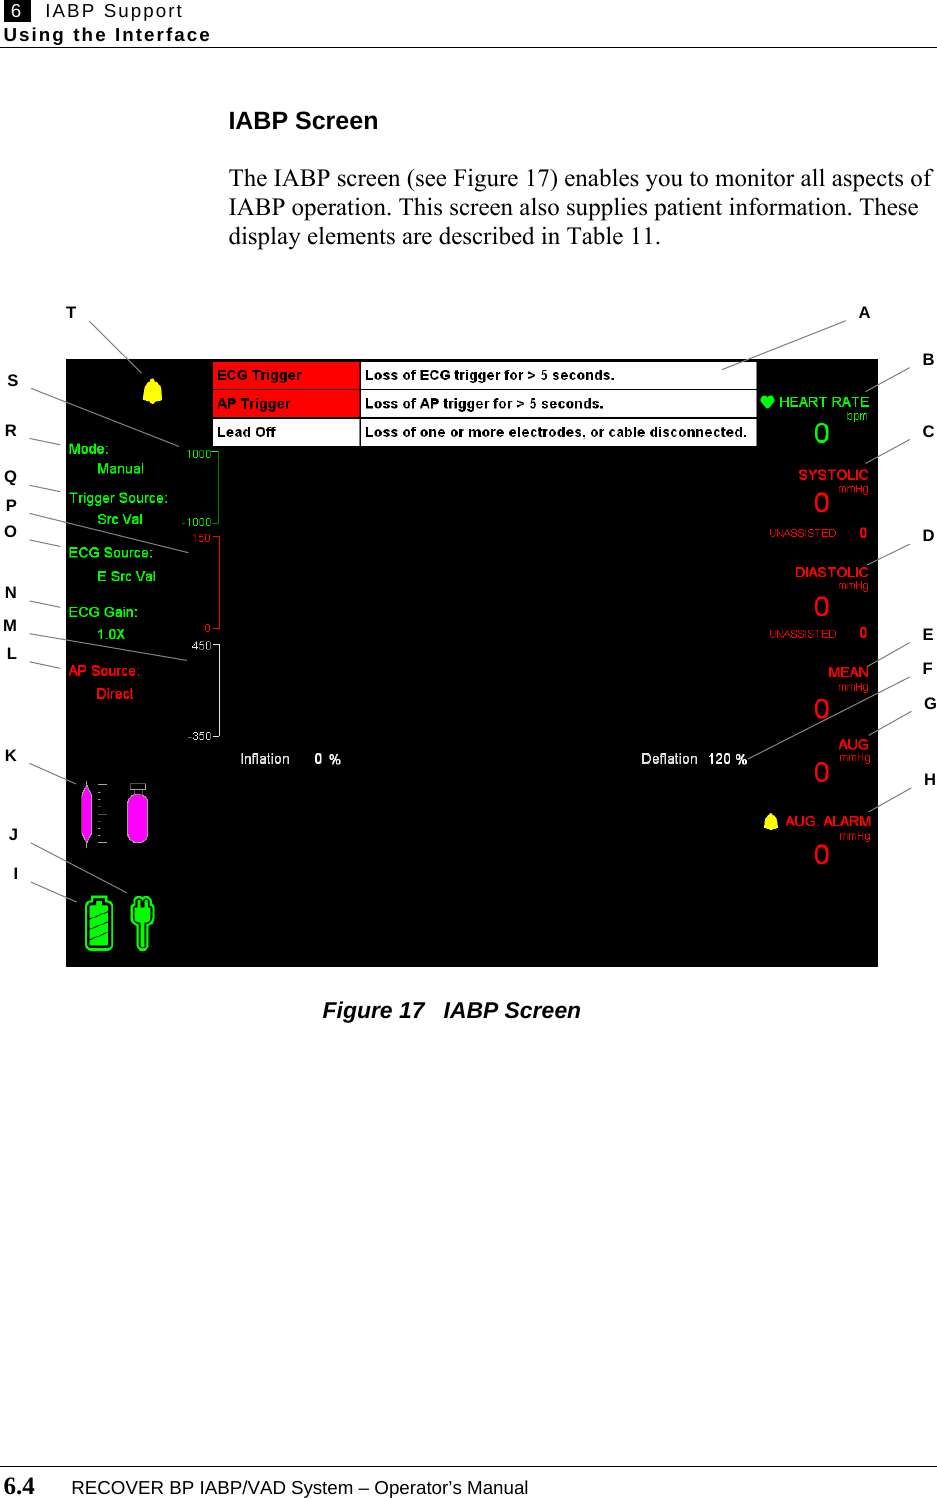  6   IABP Support Using the Interface  6.4       RECOVER BP IABP/VAD System – Operator’s Manual  IABP Screen  The IABP screen (see Figure 17) enables you to monitor all aspects of IABP operation. This screen also supplies patient information. These display elements are described in Table 11.                                      Figure 17   IABP Screen   IB RJA C D E G H TSF QONPMLK